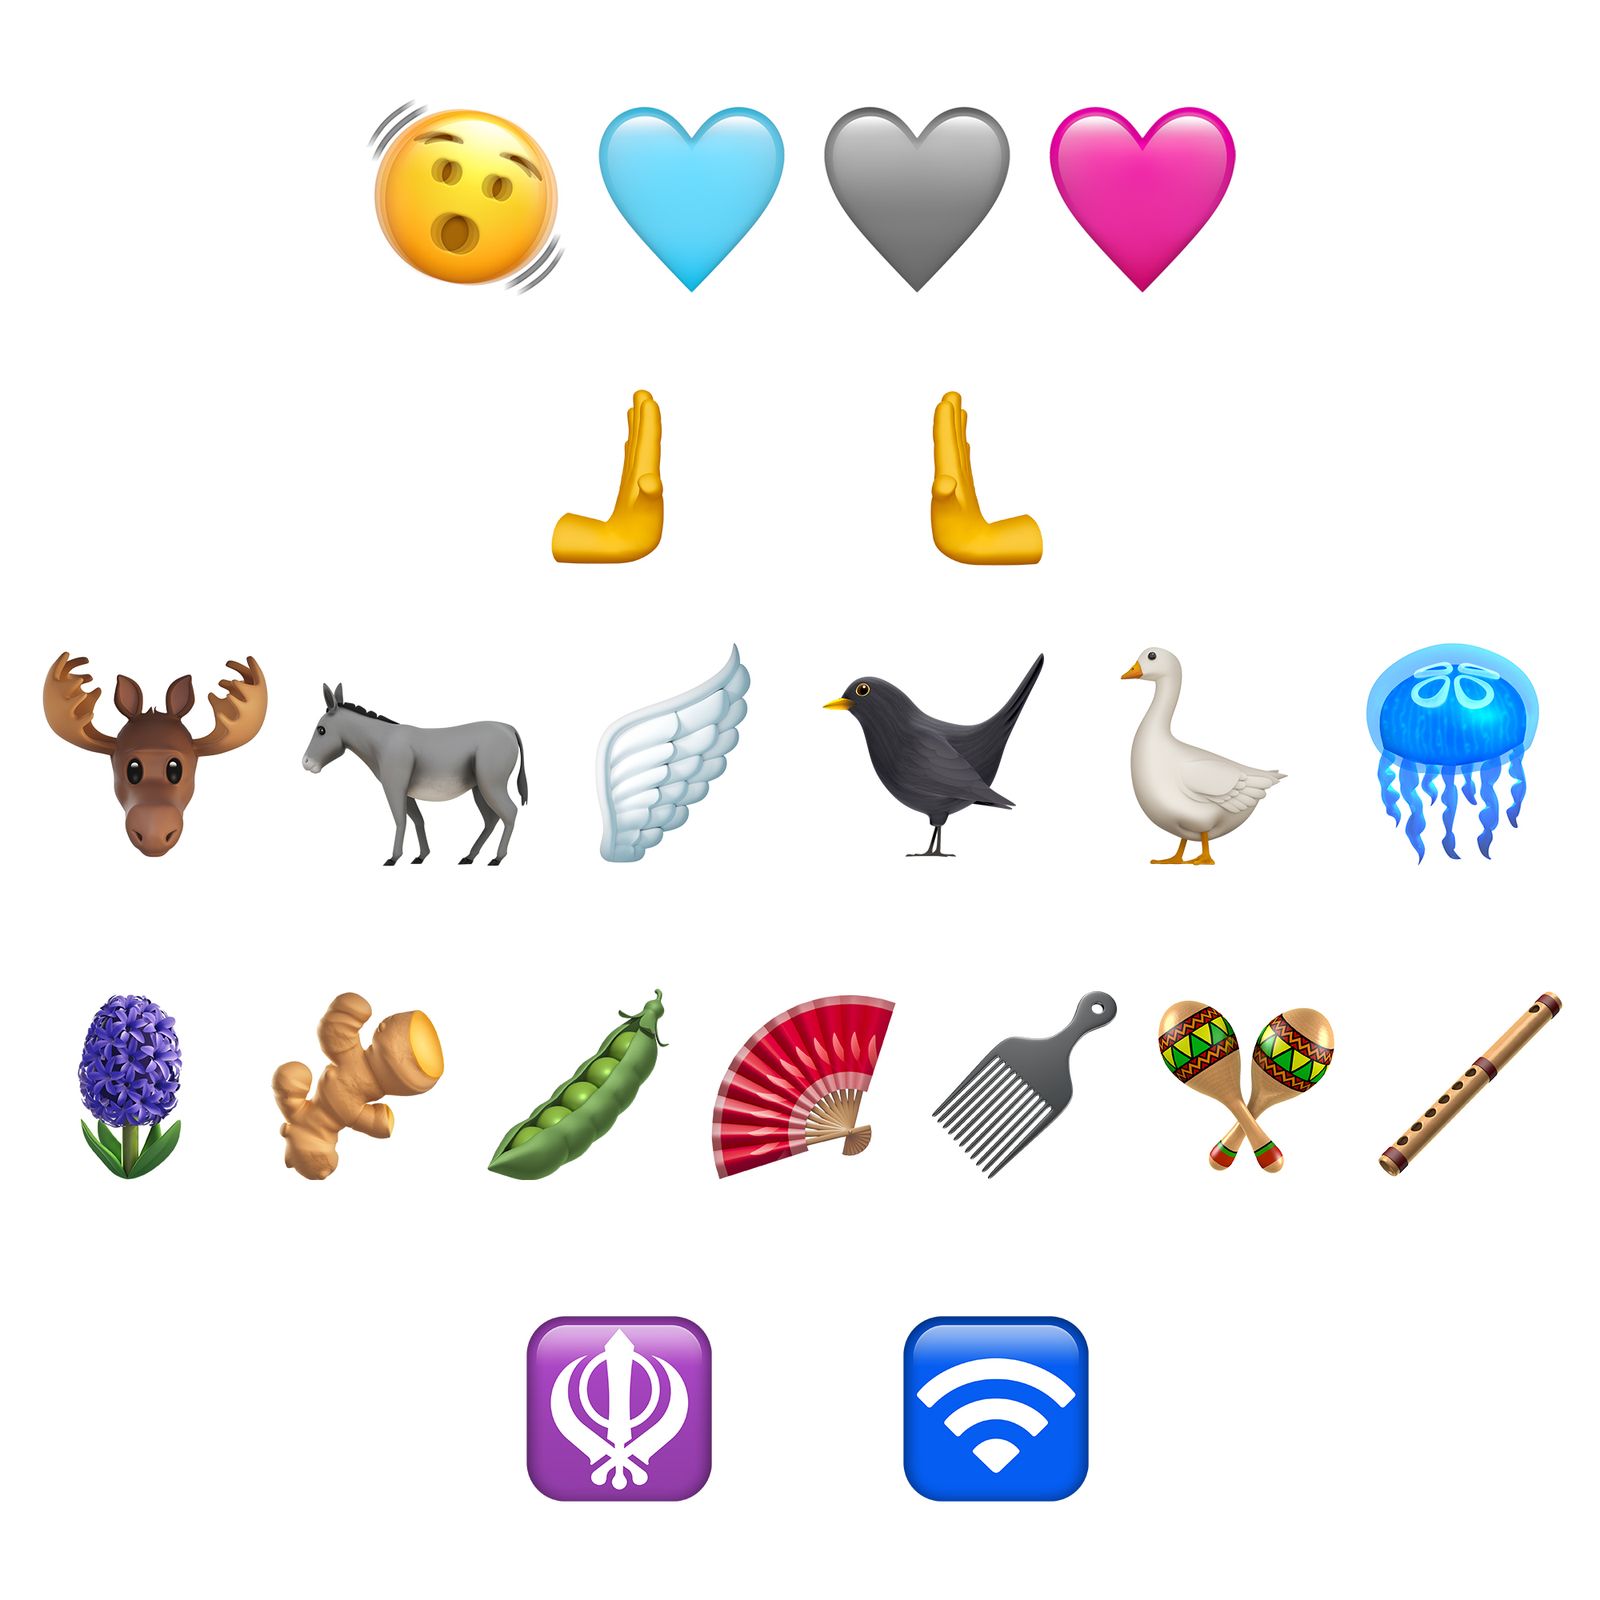 Meet the newest Apple emojis: a goose, a moose, and another pink heart